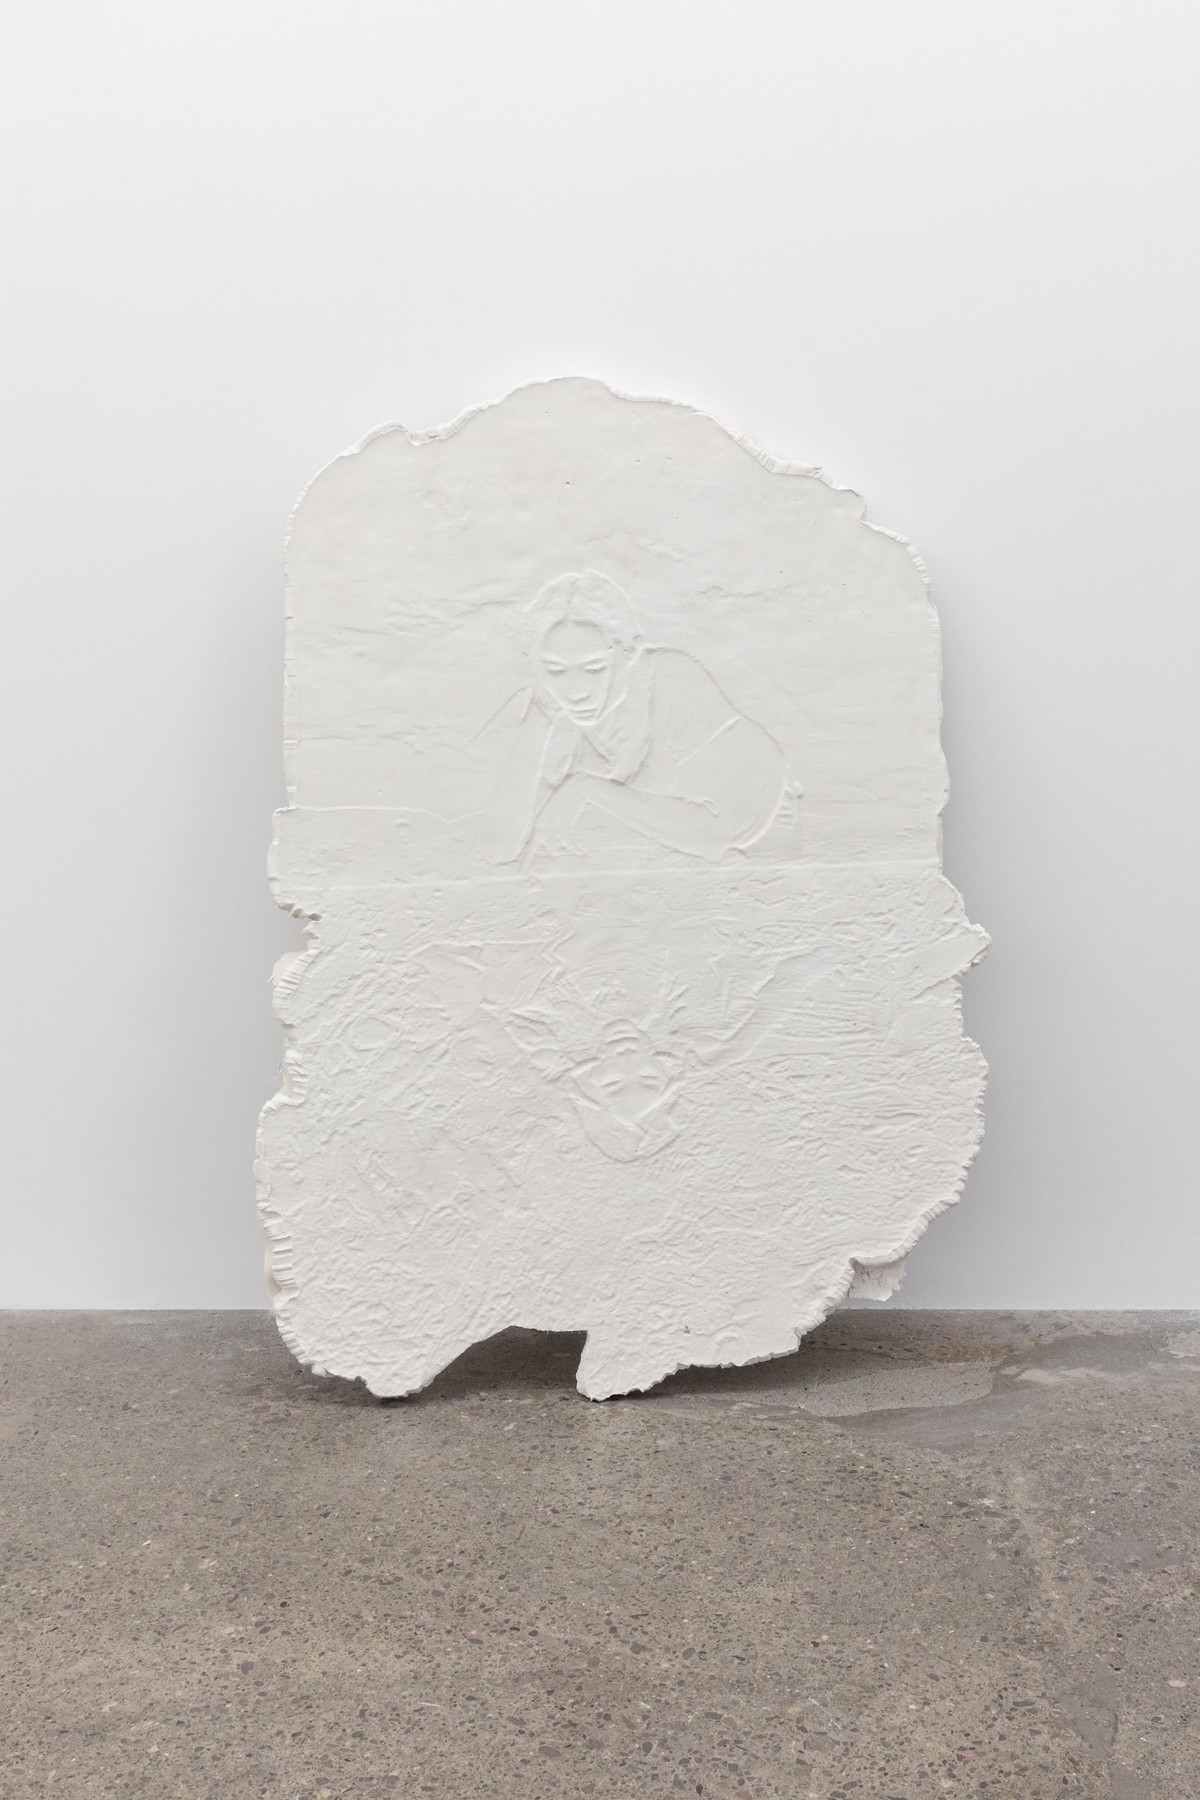 a small flat tablet of plaster with rough edges with a portrait (and its reflection, as though looking down onto a mirrored table) carved lightly into the surface.